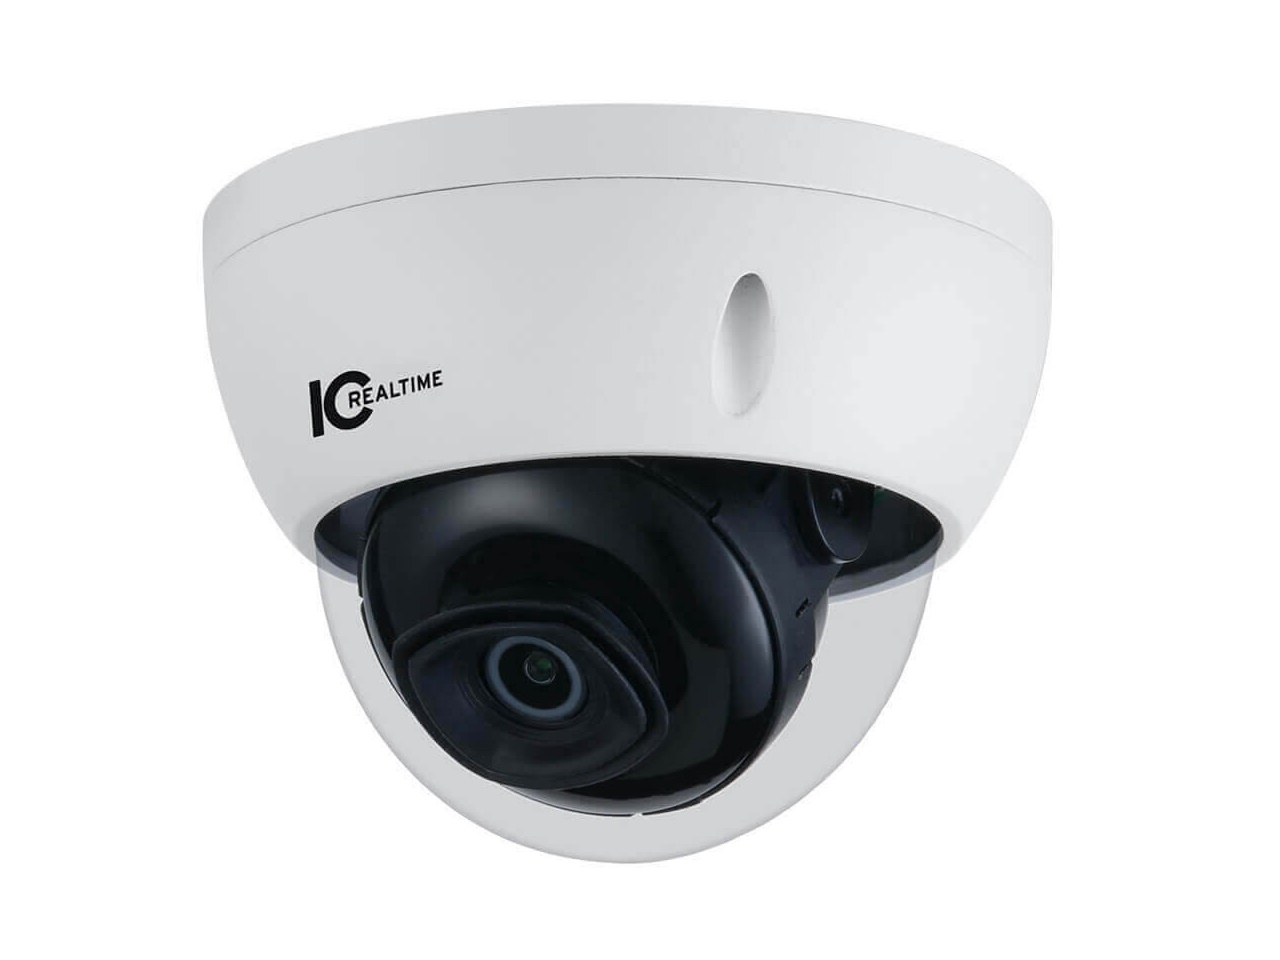 IPMX-D20F-IRW2 2MP IP Indoor/Outdoor Small Size Vandal Dome Camera/164ft IR/PoE Capable by ICRealtime